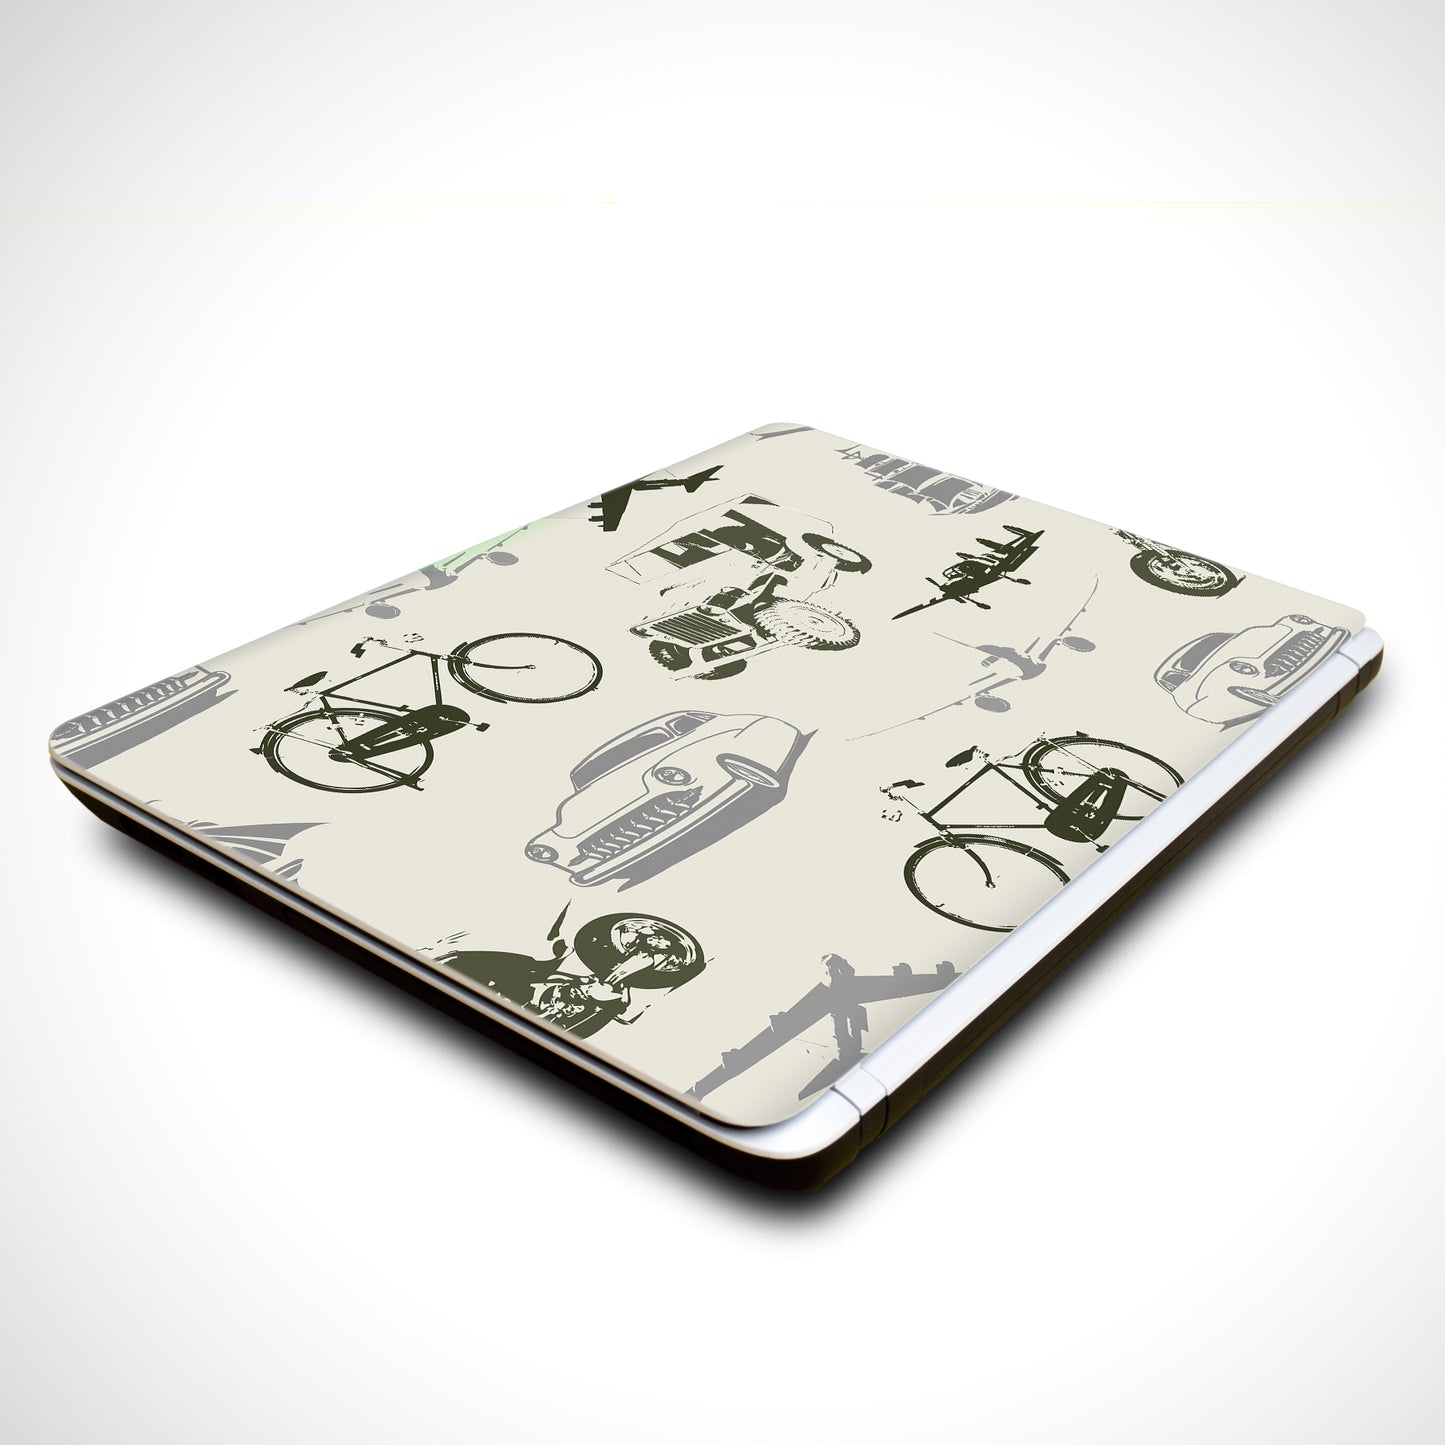 iberry's Vinyl Laptop Skin Sticker Collection for Dell, Hp, Toshiba, Acer, Asus & All Models (Upto 15.6 inches) -19